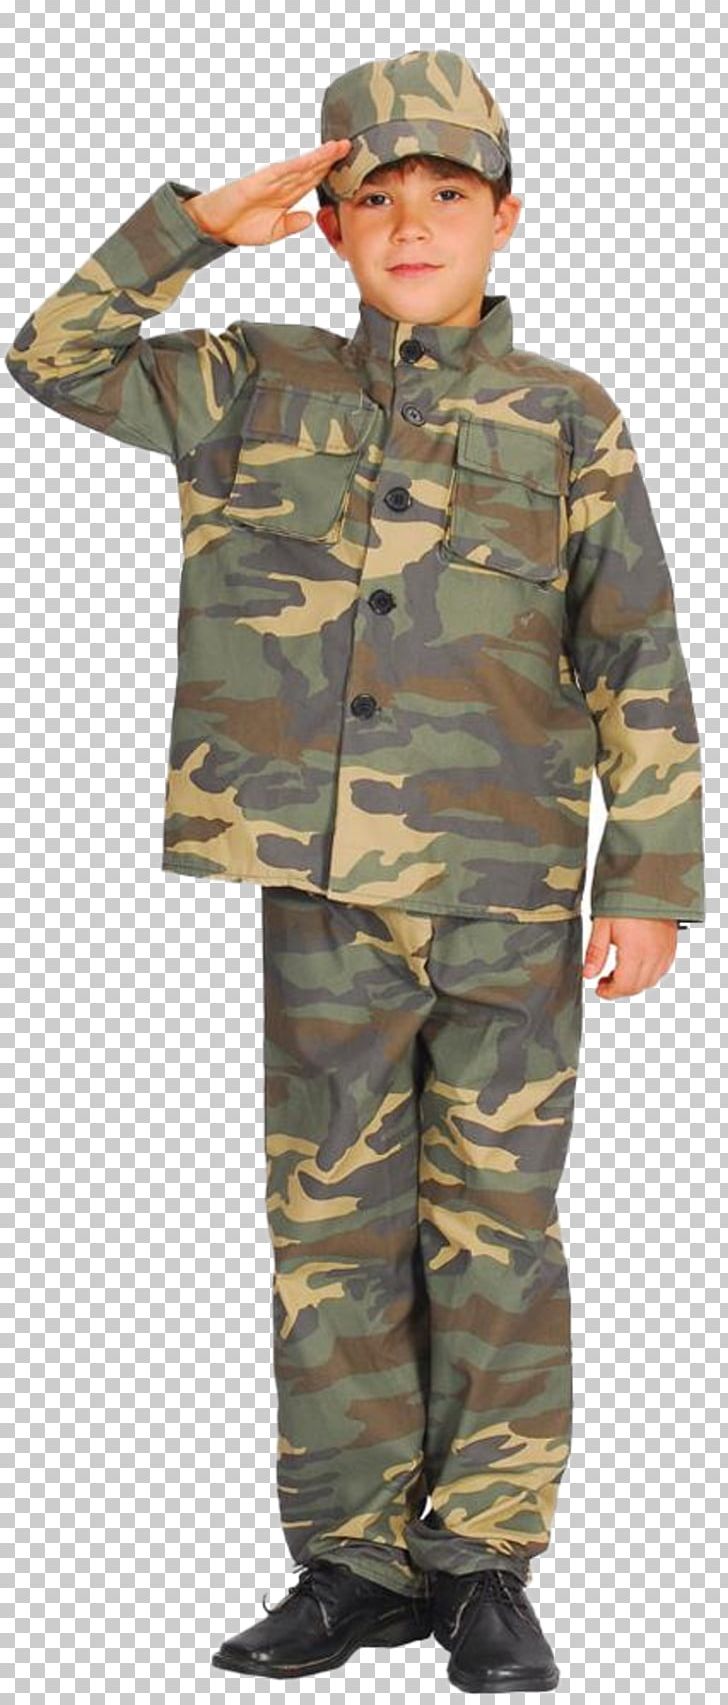 Commando Costume Party Military Boy PNG, Clipart, Army, Boy, Camouflage, Child, Clothing Free PNG Download